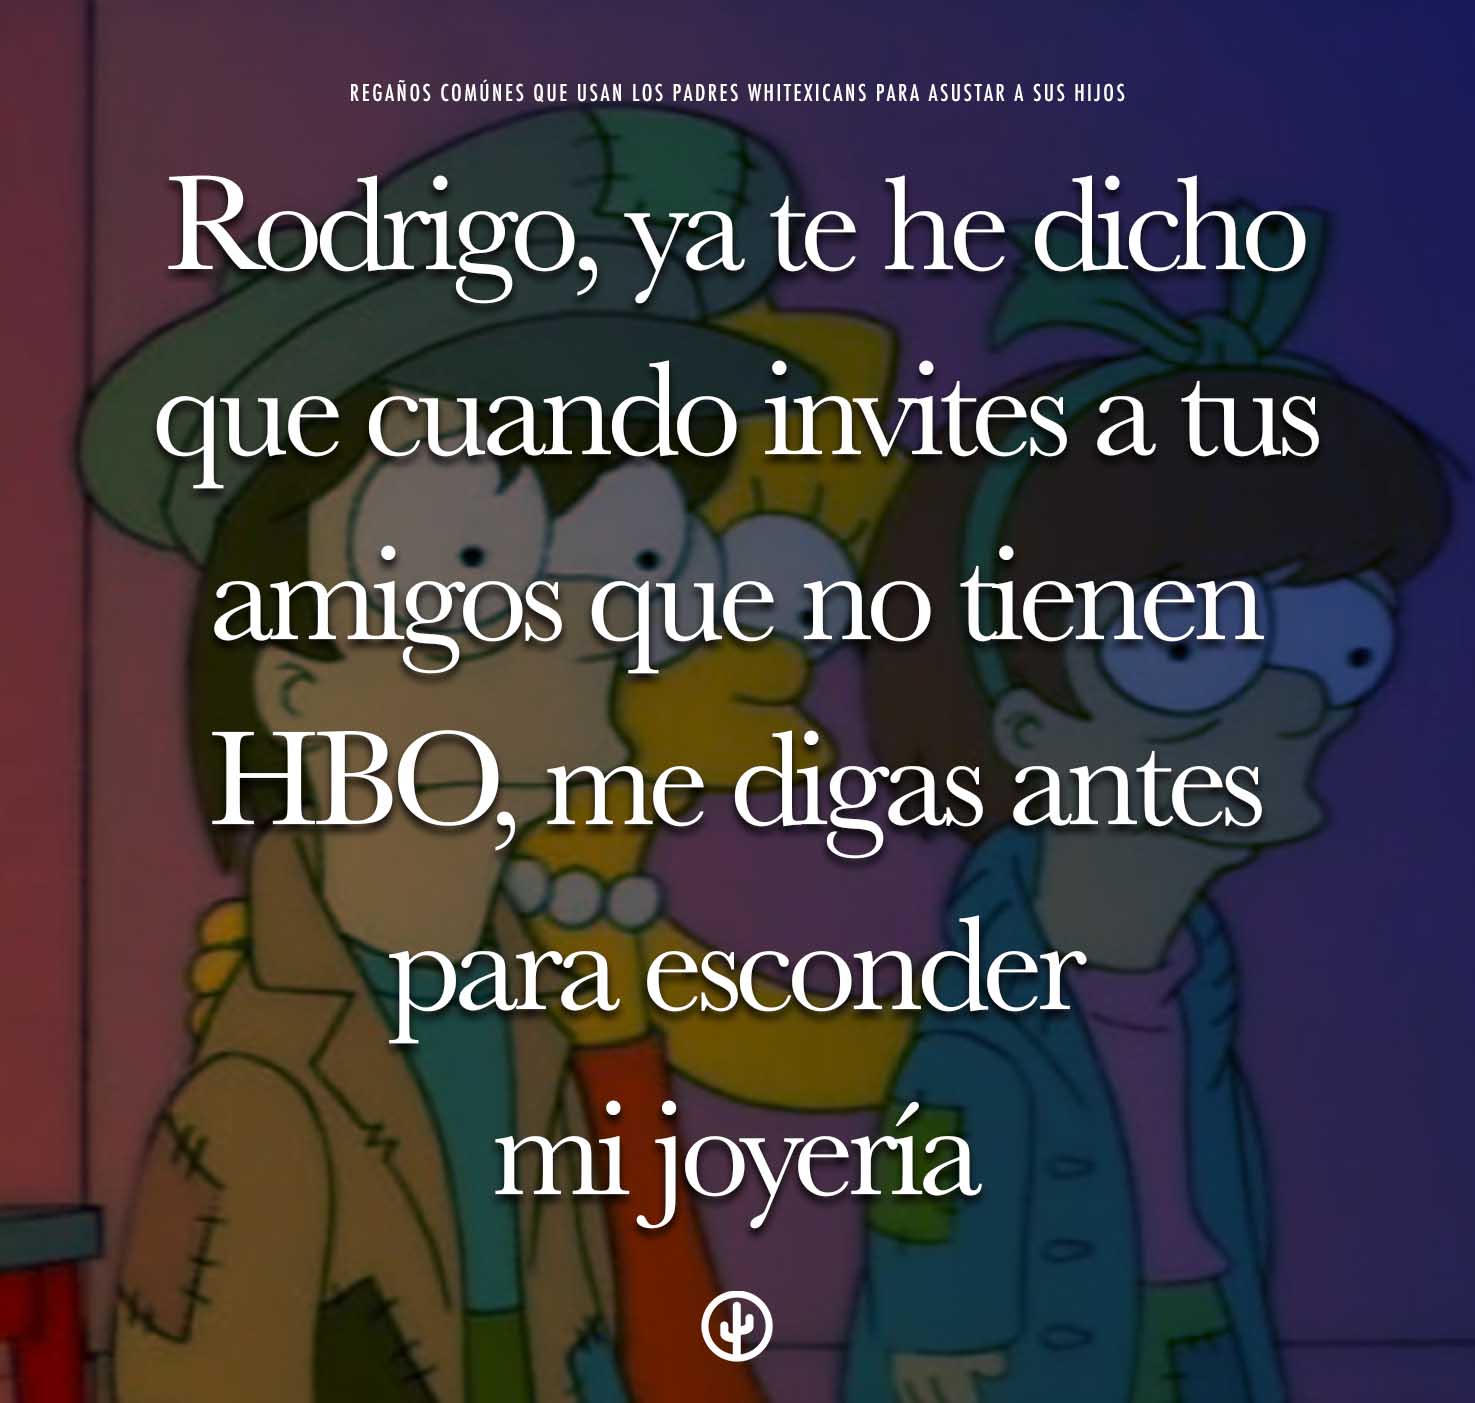 HBO Whitexicans